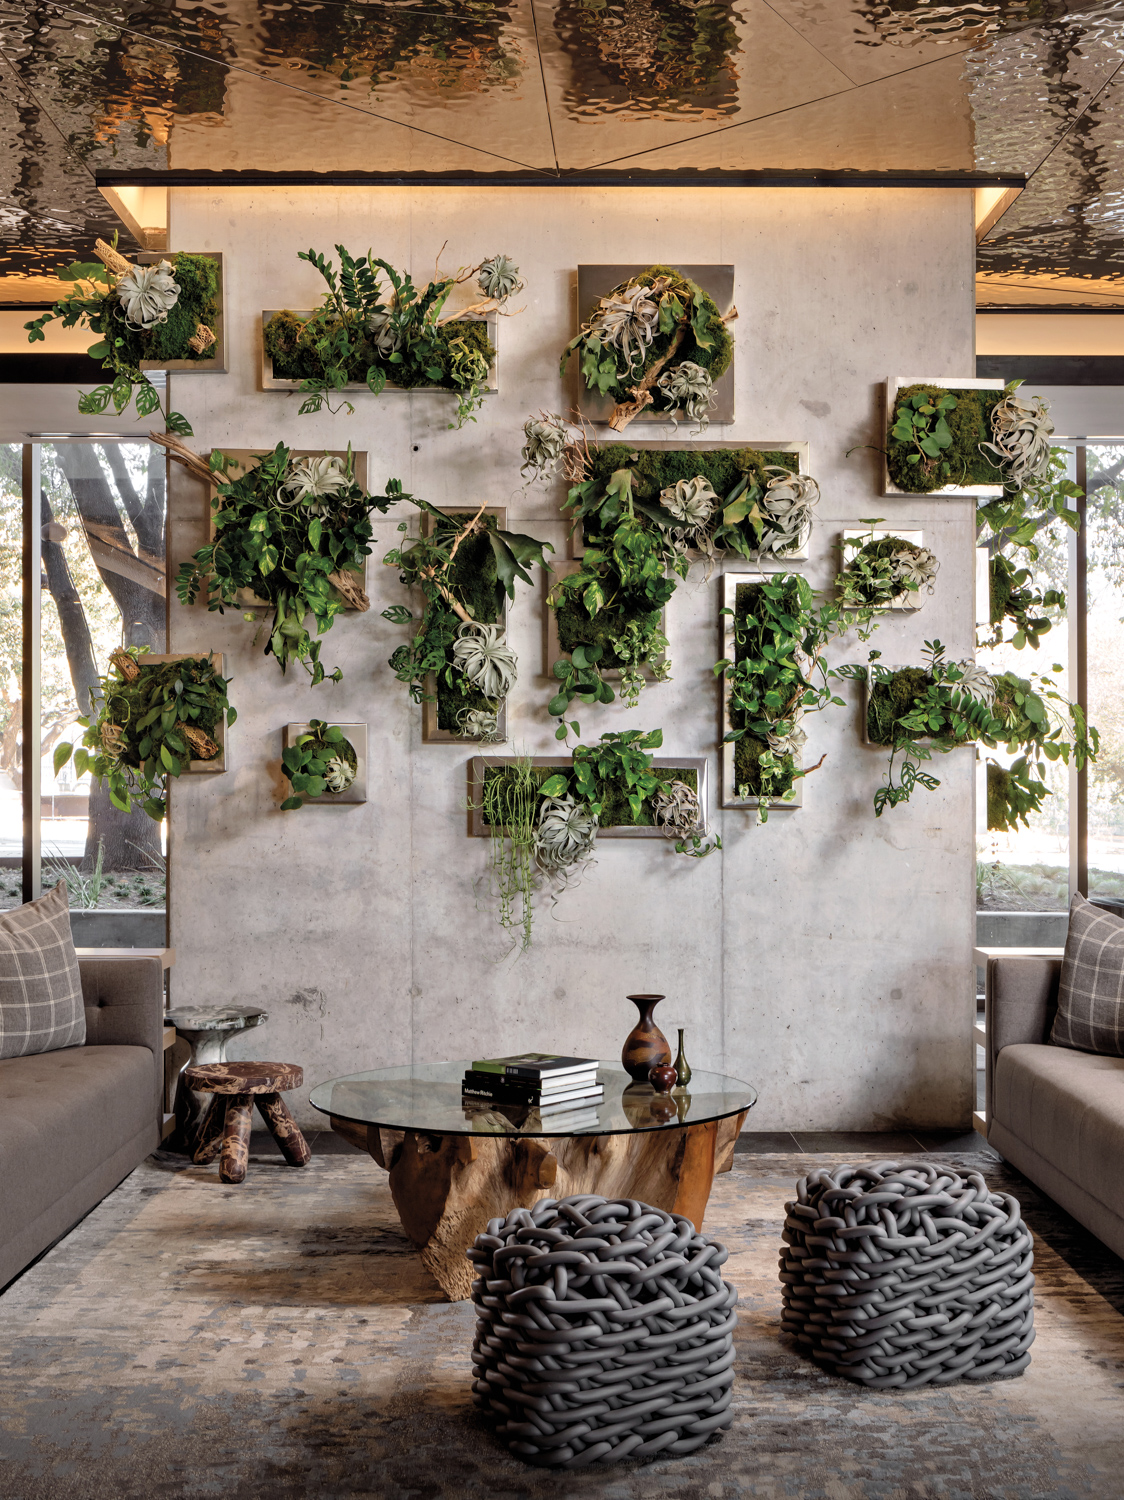 Gray-toned seating area centered by concrete wall with building planters with greenery growing out